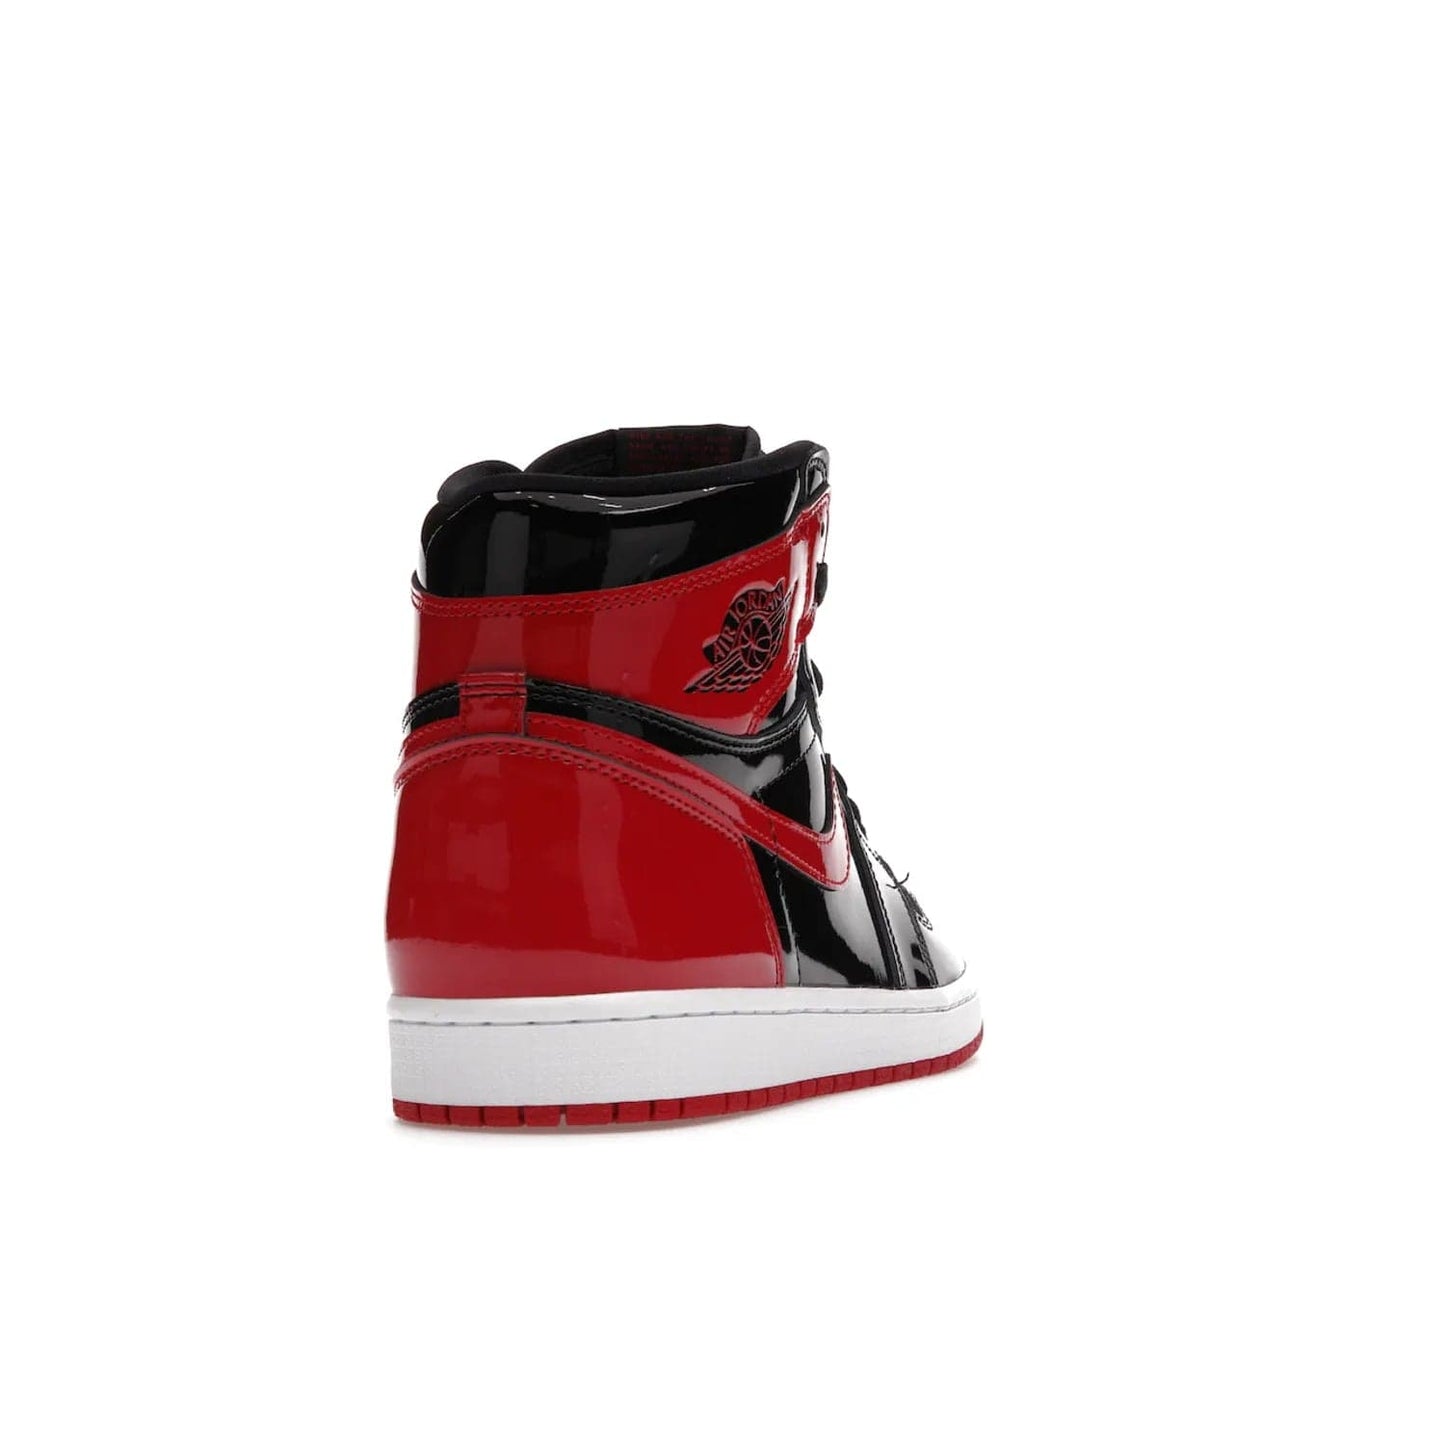 Jordan 1 Retro High OG Patent Bred - Image 30 - Only at www.BallersClubKickz.com - Introducing Air Jordan 1 Retro High OG Patent Bred - sleek patent leather upper, signature weaved Nike Air tongue and classic Wings logo on collar. Red and white sole complete signature look. Releasing December 2021 - perfect retro edition for holidays.